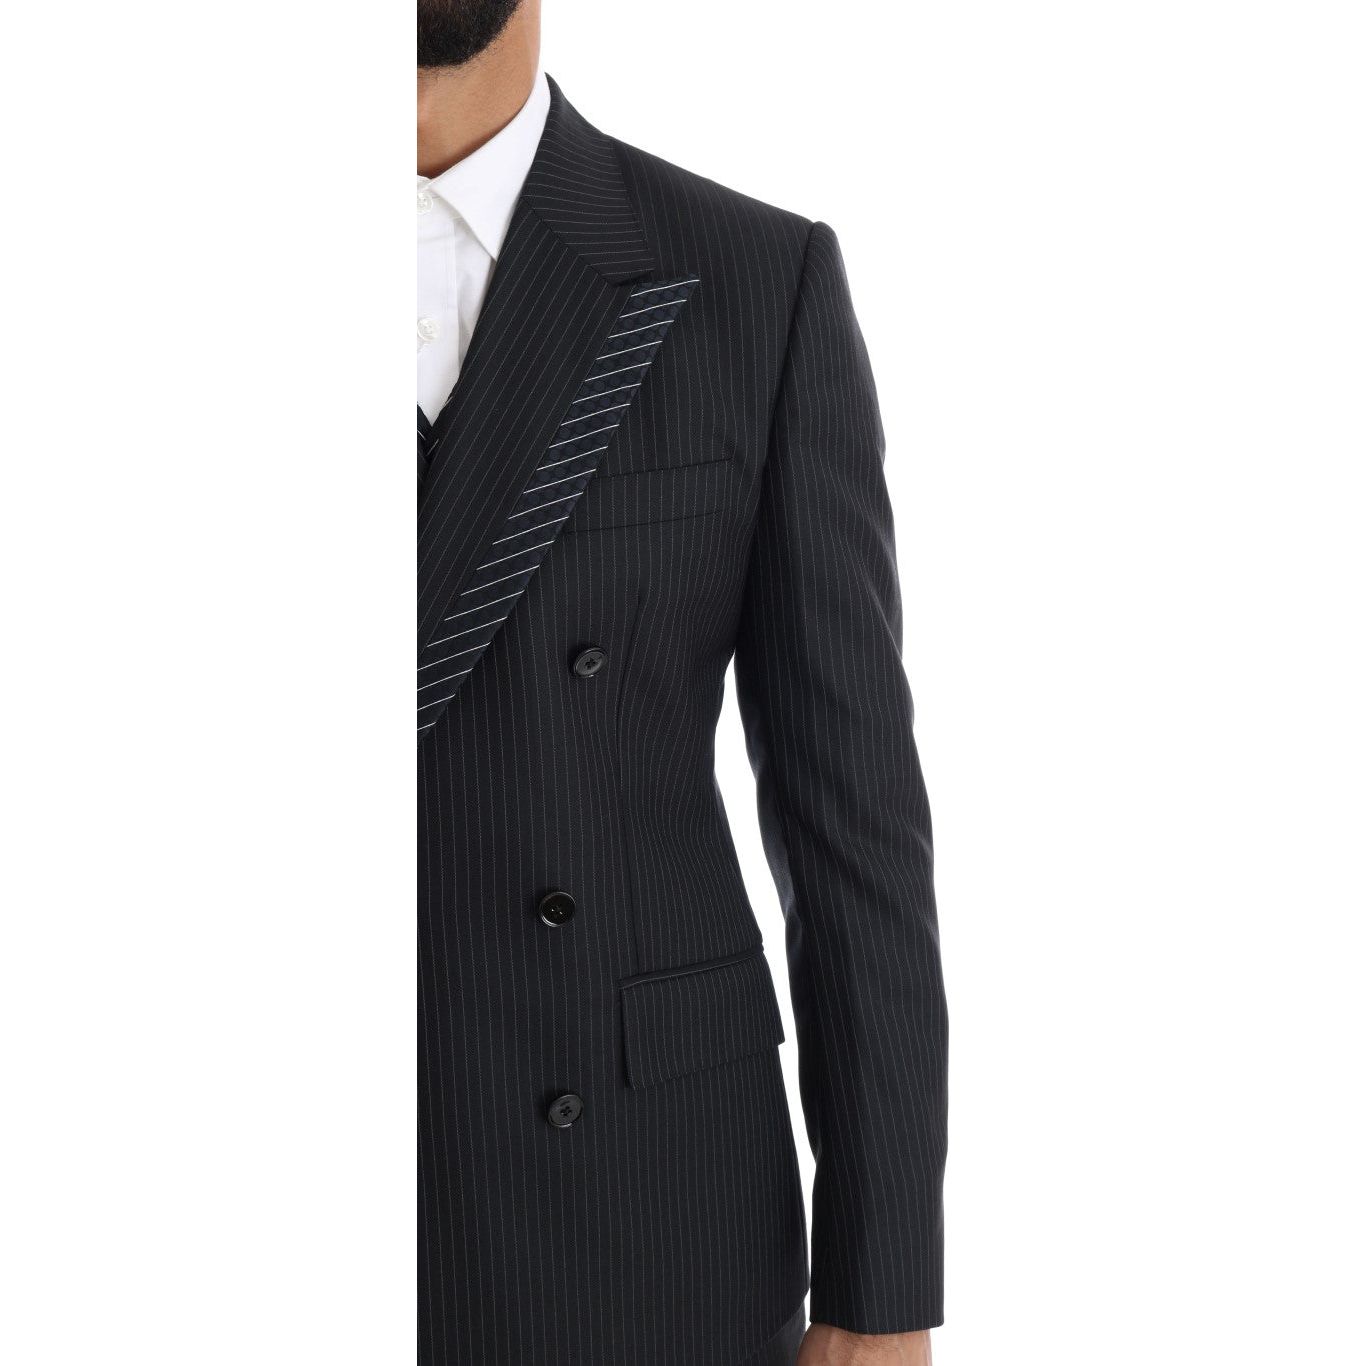 Dolce & Gabbana Elegant Gray Striped Wool Silk Men's 3-Piece Suit Suit gray-double-breasted-3-piece-suit 460447-gray-double-breasted-3-piece-suit-4.jpg